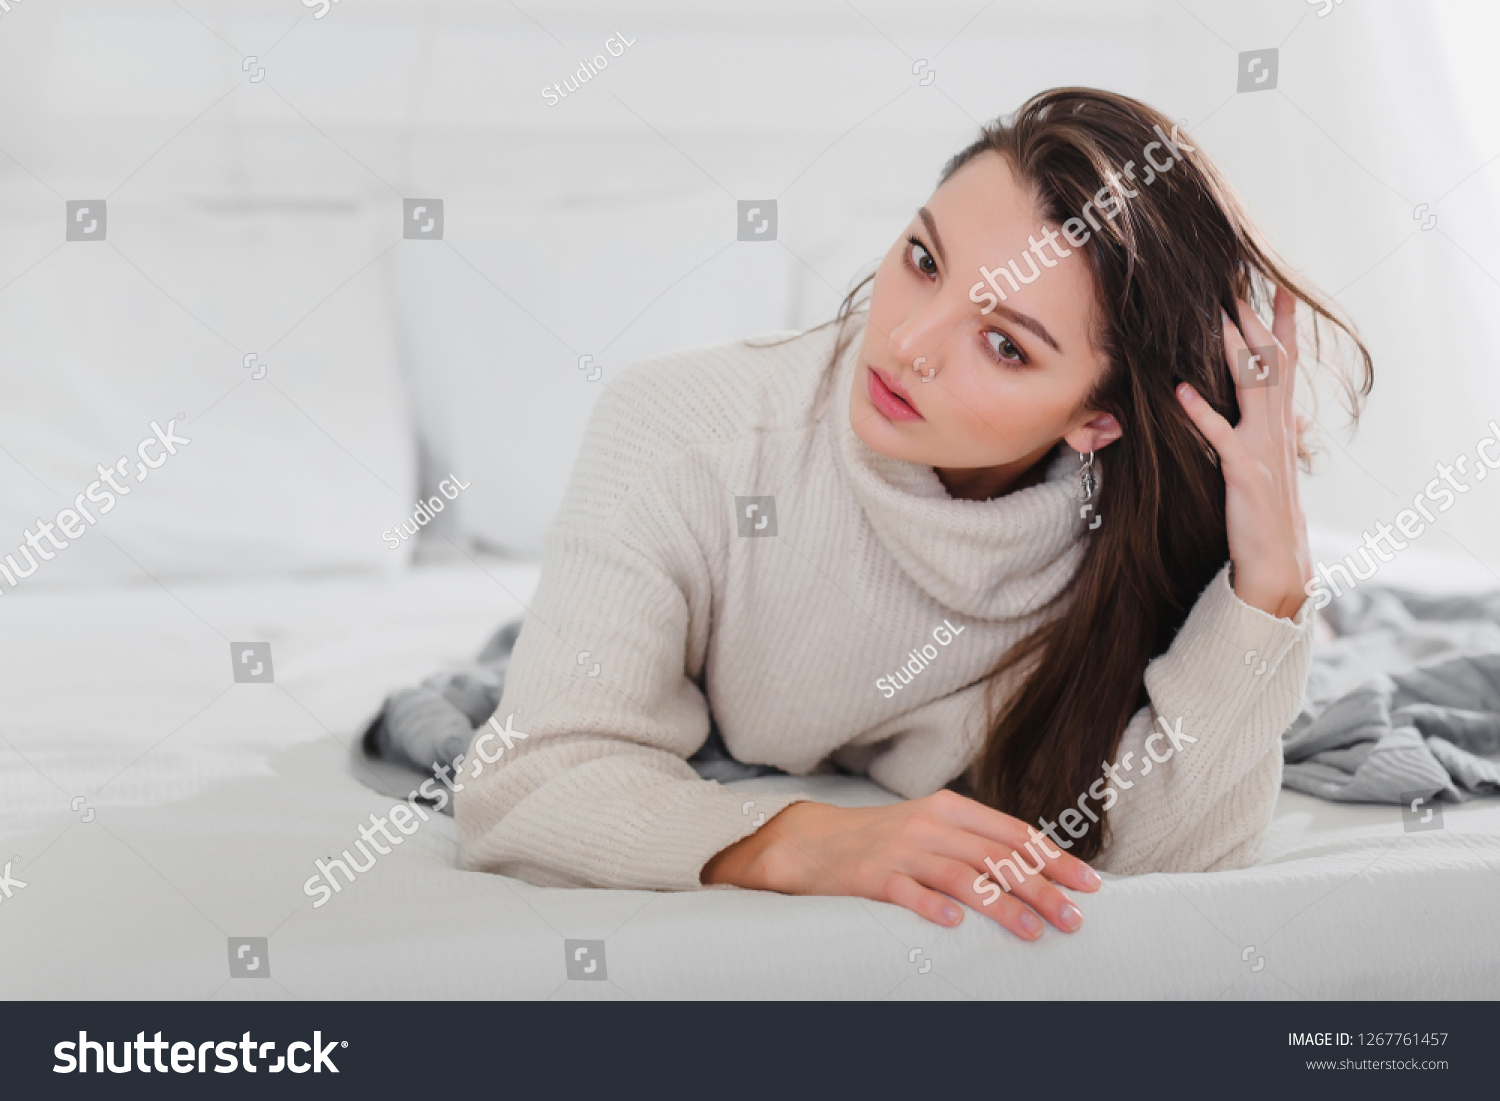 Girl brunette sweater pants gray lies on her hand. Concept thinks, choice, solution, dilemma, skin care, self care, sleep. Copy space left. Closeup. #1267761457